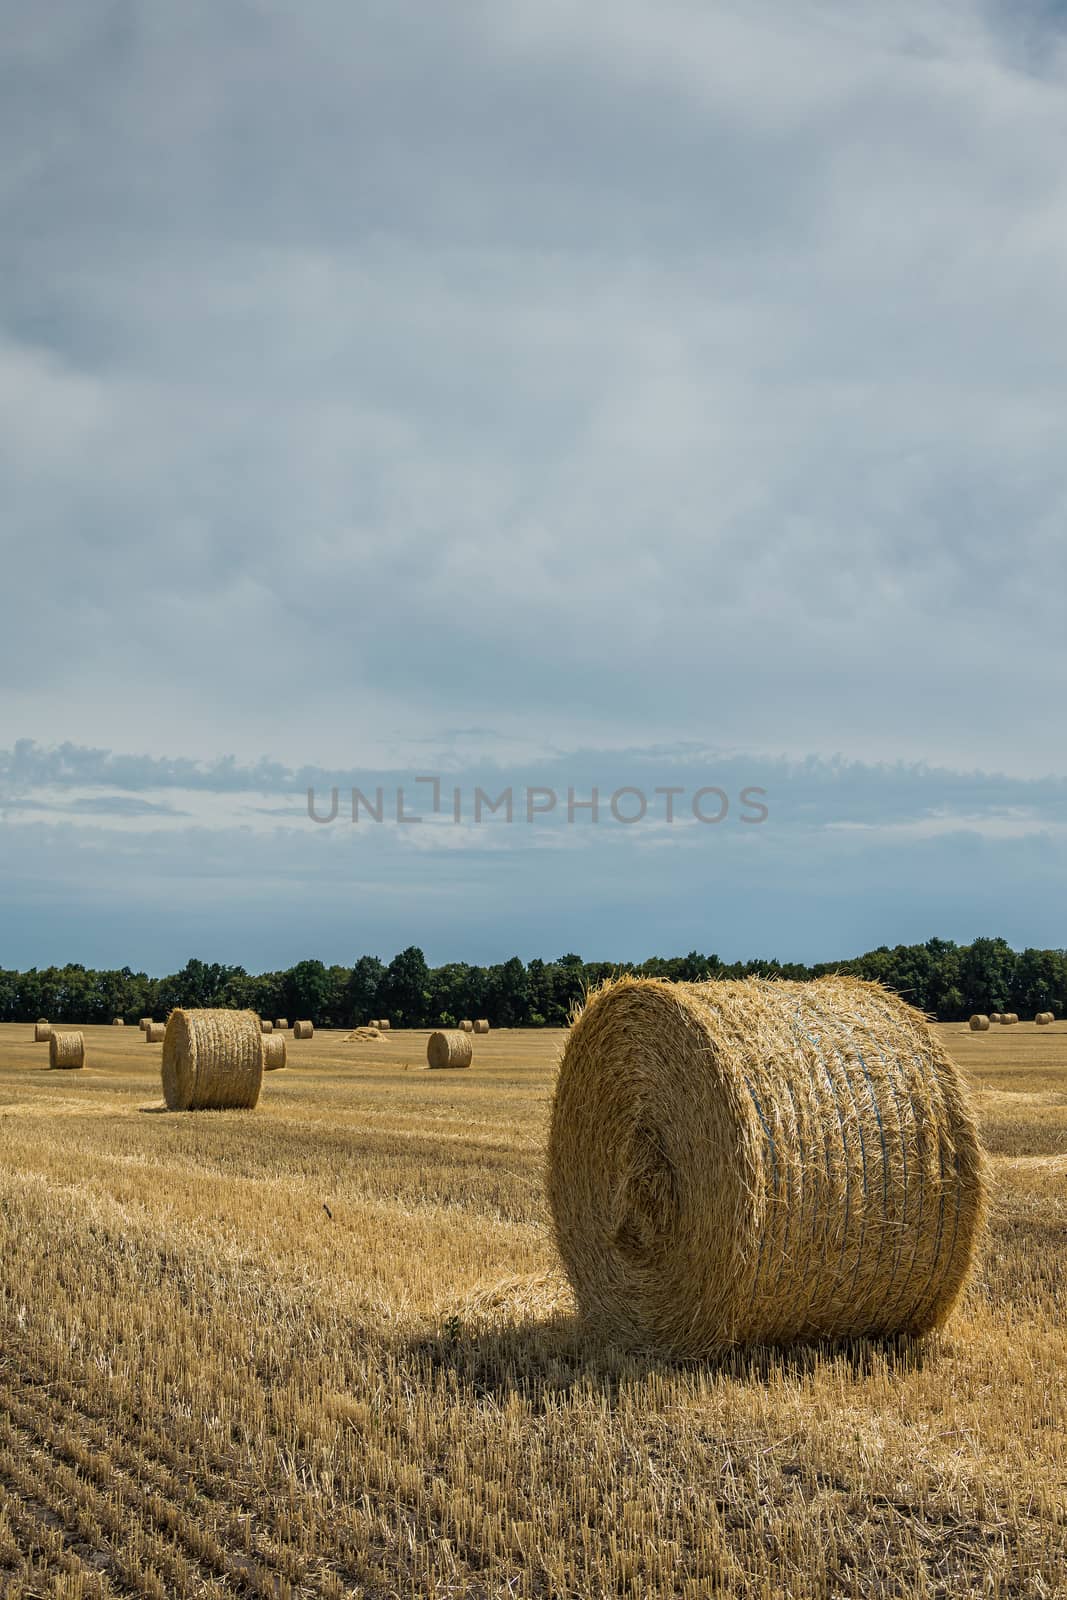 The sloping wheat field with haystacks